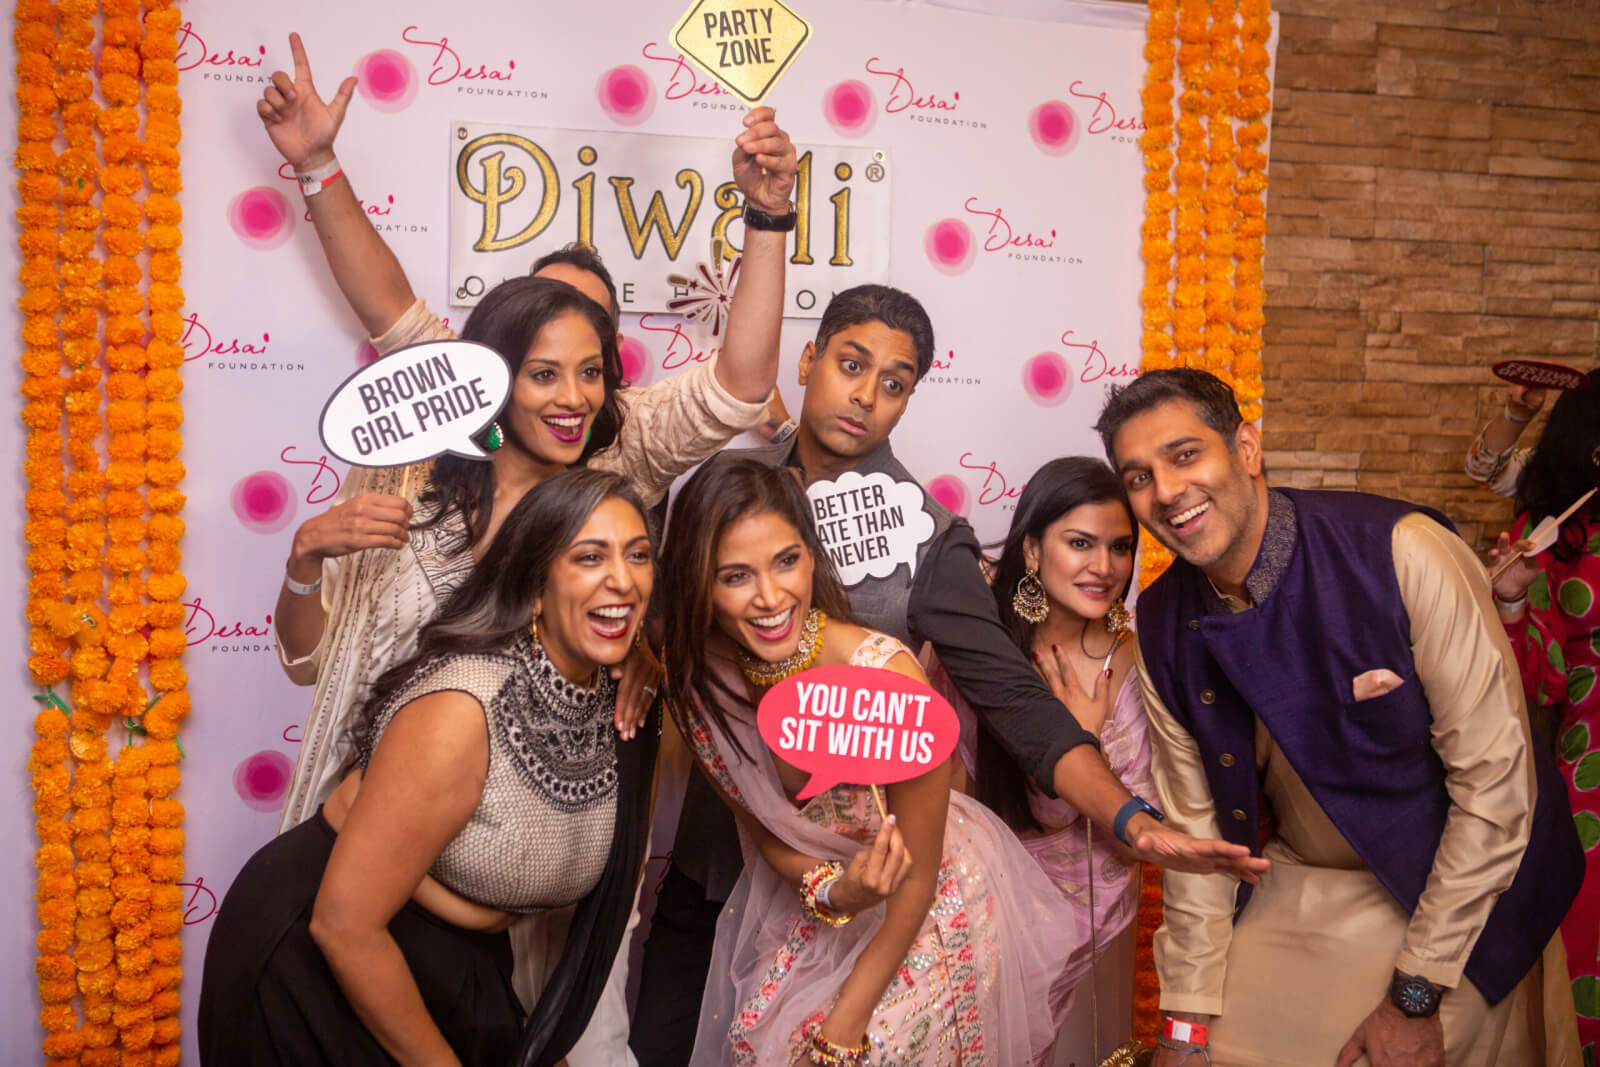 Event Alert: The Desai Foundation Rings In 10th Anniversary of "Diwali On The Hudson" Gala